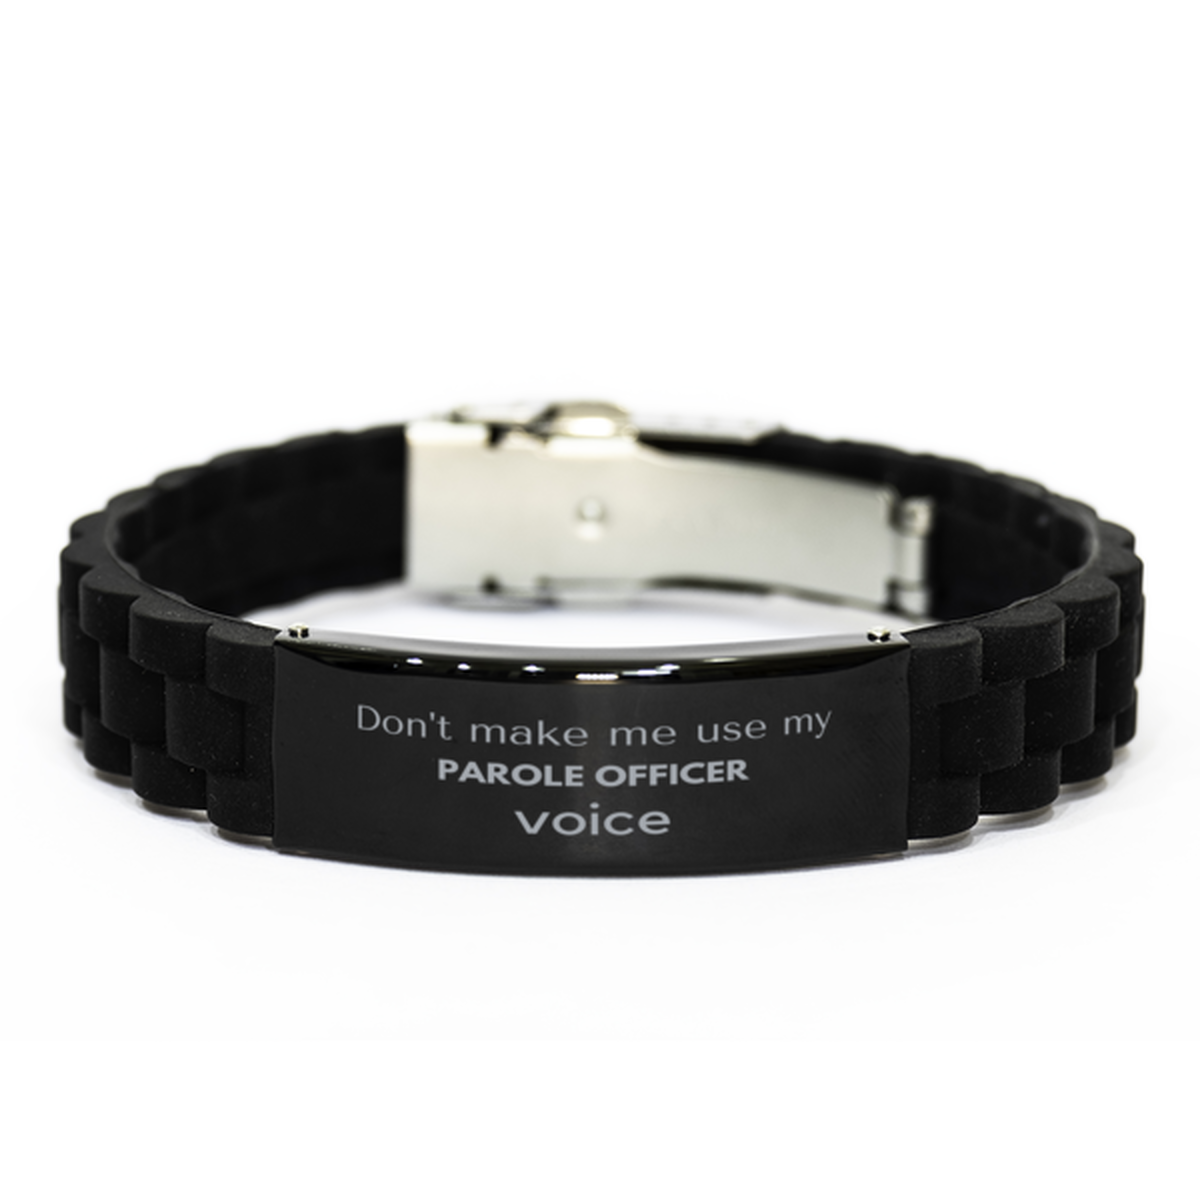 Don't make me use my Parole Officer voice, Sarcasm Parole Officer Gifts, Christmas Parole Officer Black Glidelock Clasp Bracelet Birthday Unique Gifts For Parole Officer Coworkers, Men, Women, Colleague, Friends